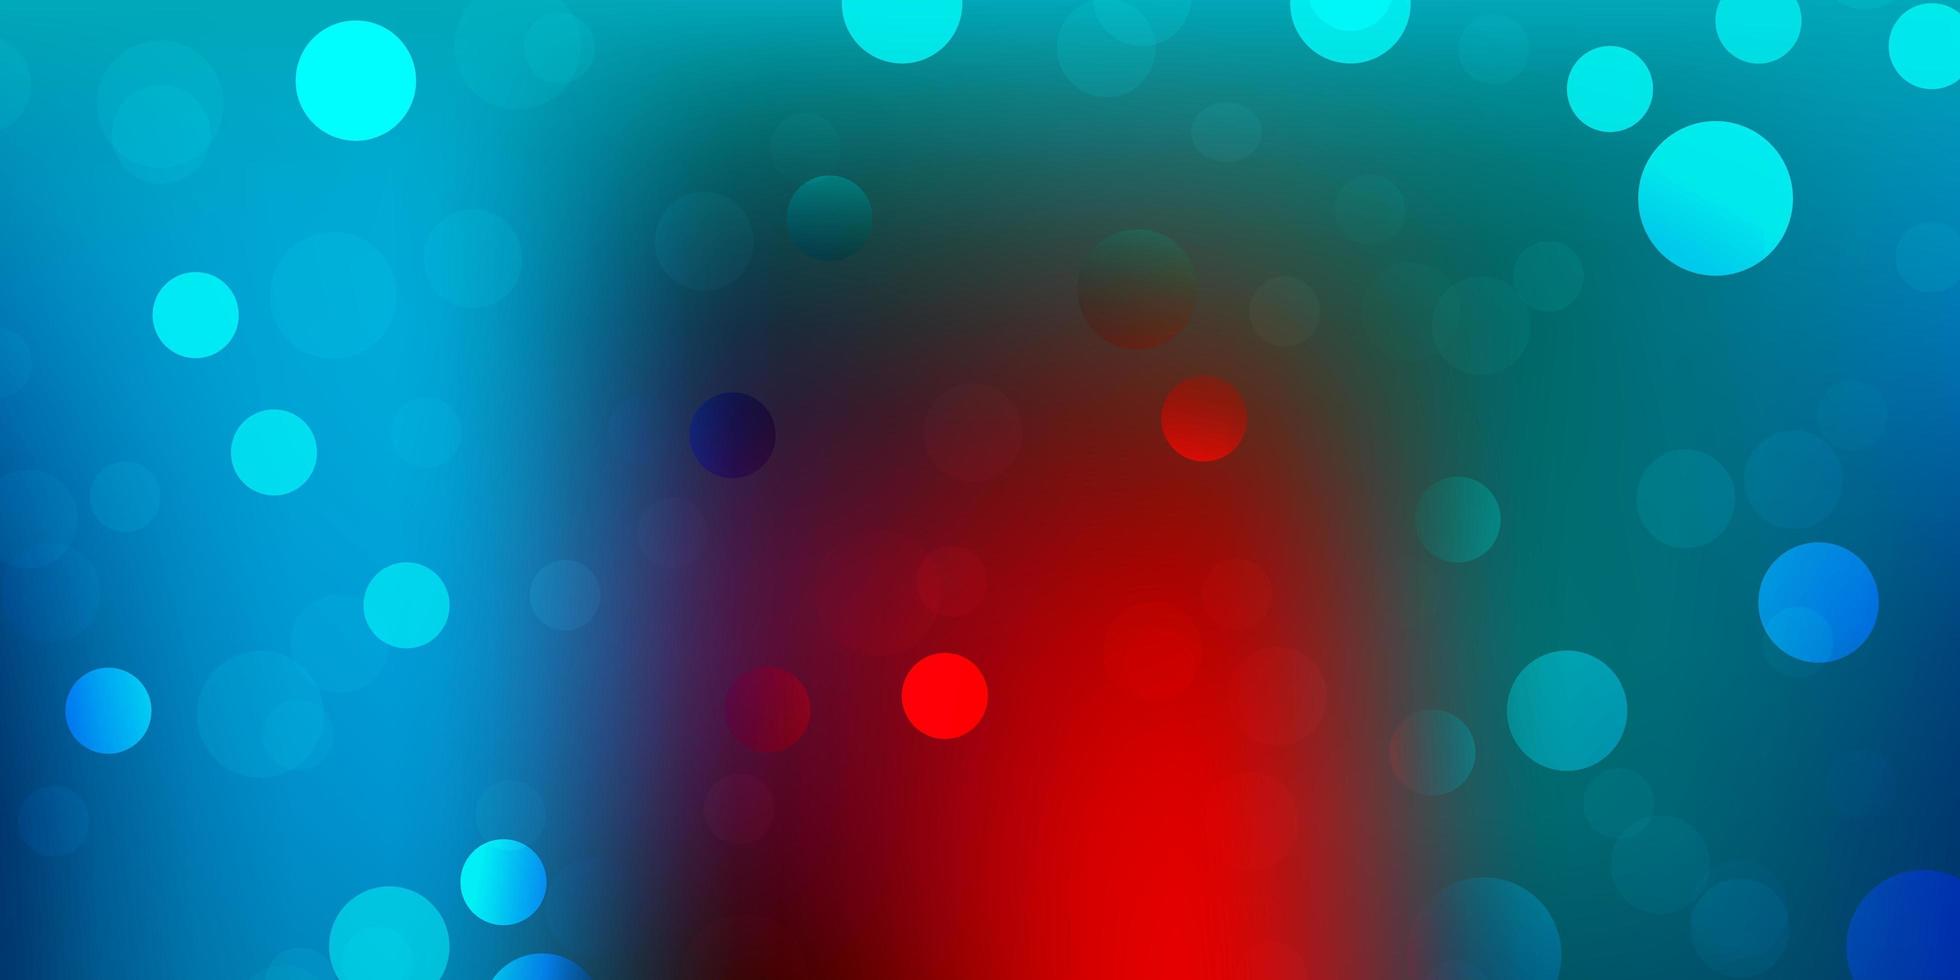 Light blue, red vector pattern with spheres.